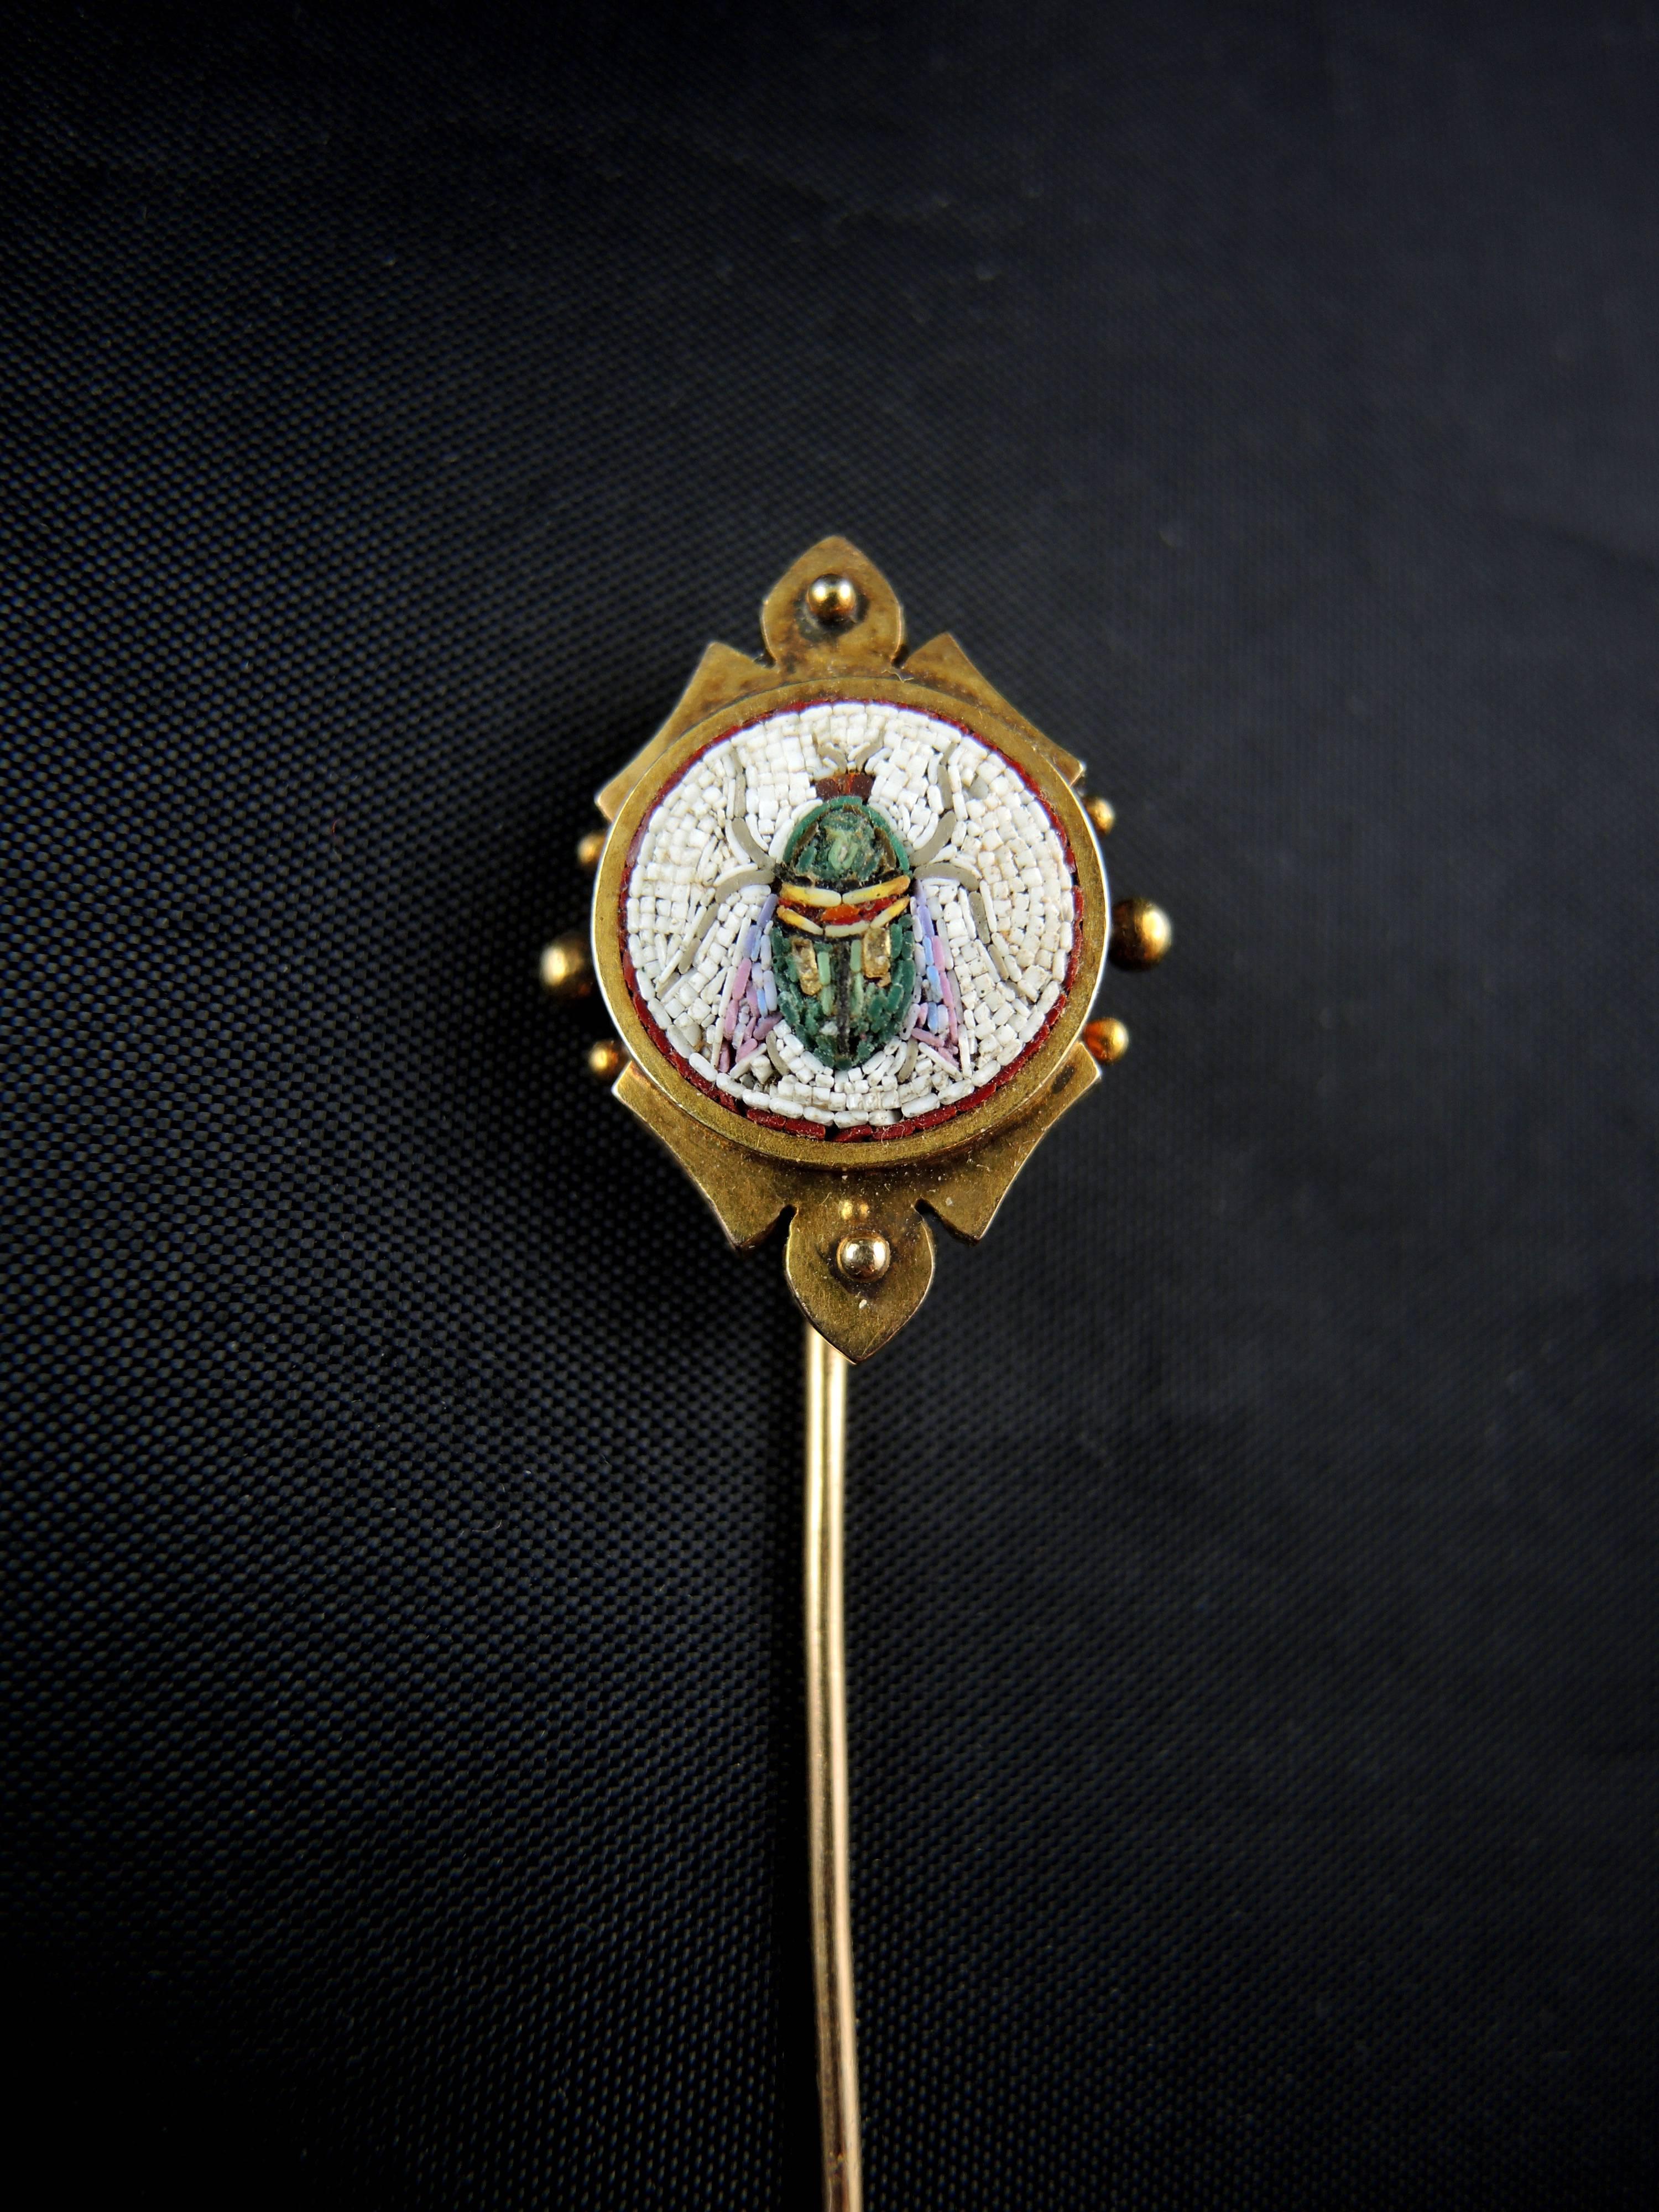 Rare 18kt gold pin (quality mark: owl) with a stunning micro mosaic showing a green and gold scarab beetle on a white backgroung.

Work from the 19th century, circa 1850, etruscan revival.

Weight: 4,30 g
Height: 7,30 cm

State : very little